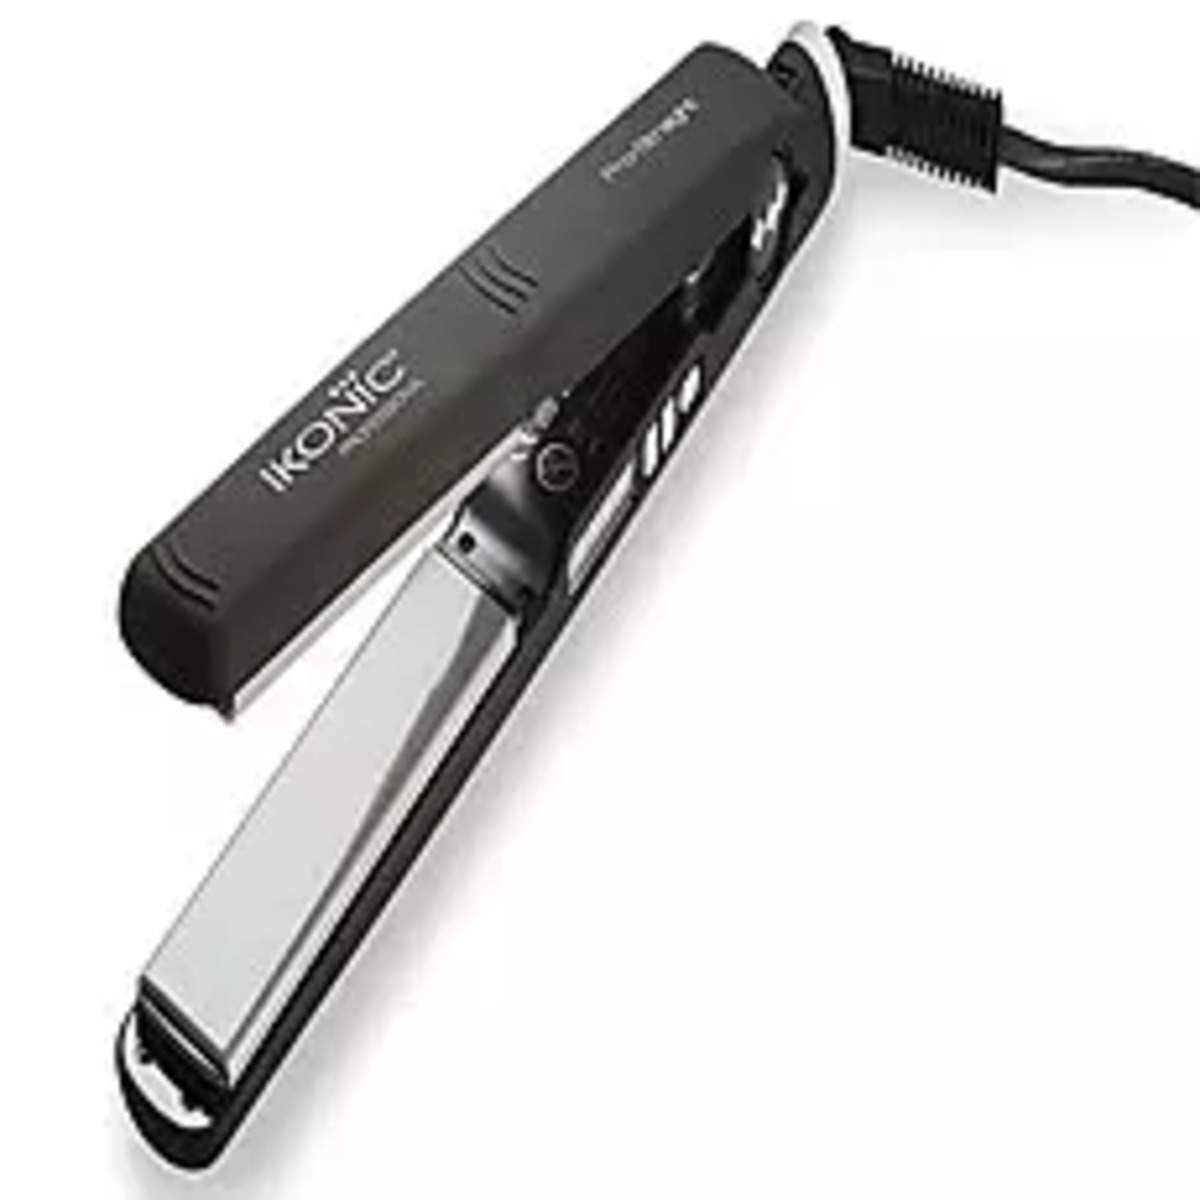 Ikonic PS Pro Hair Straightner (Black) Price in India, Specifications and  Review